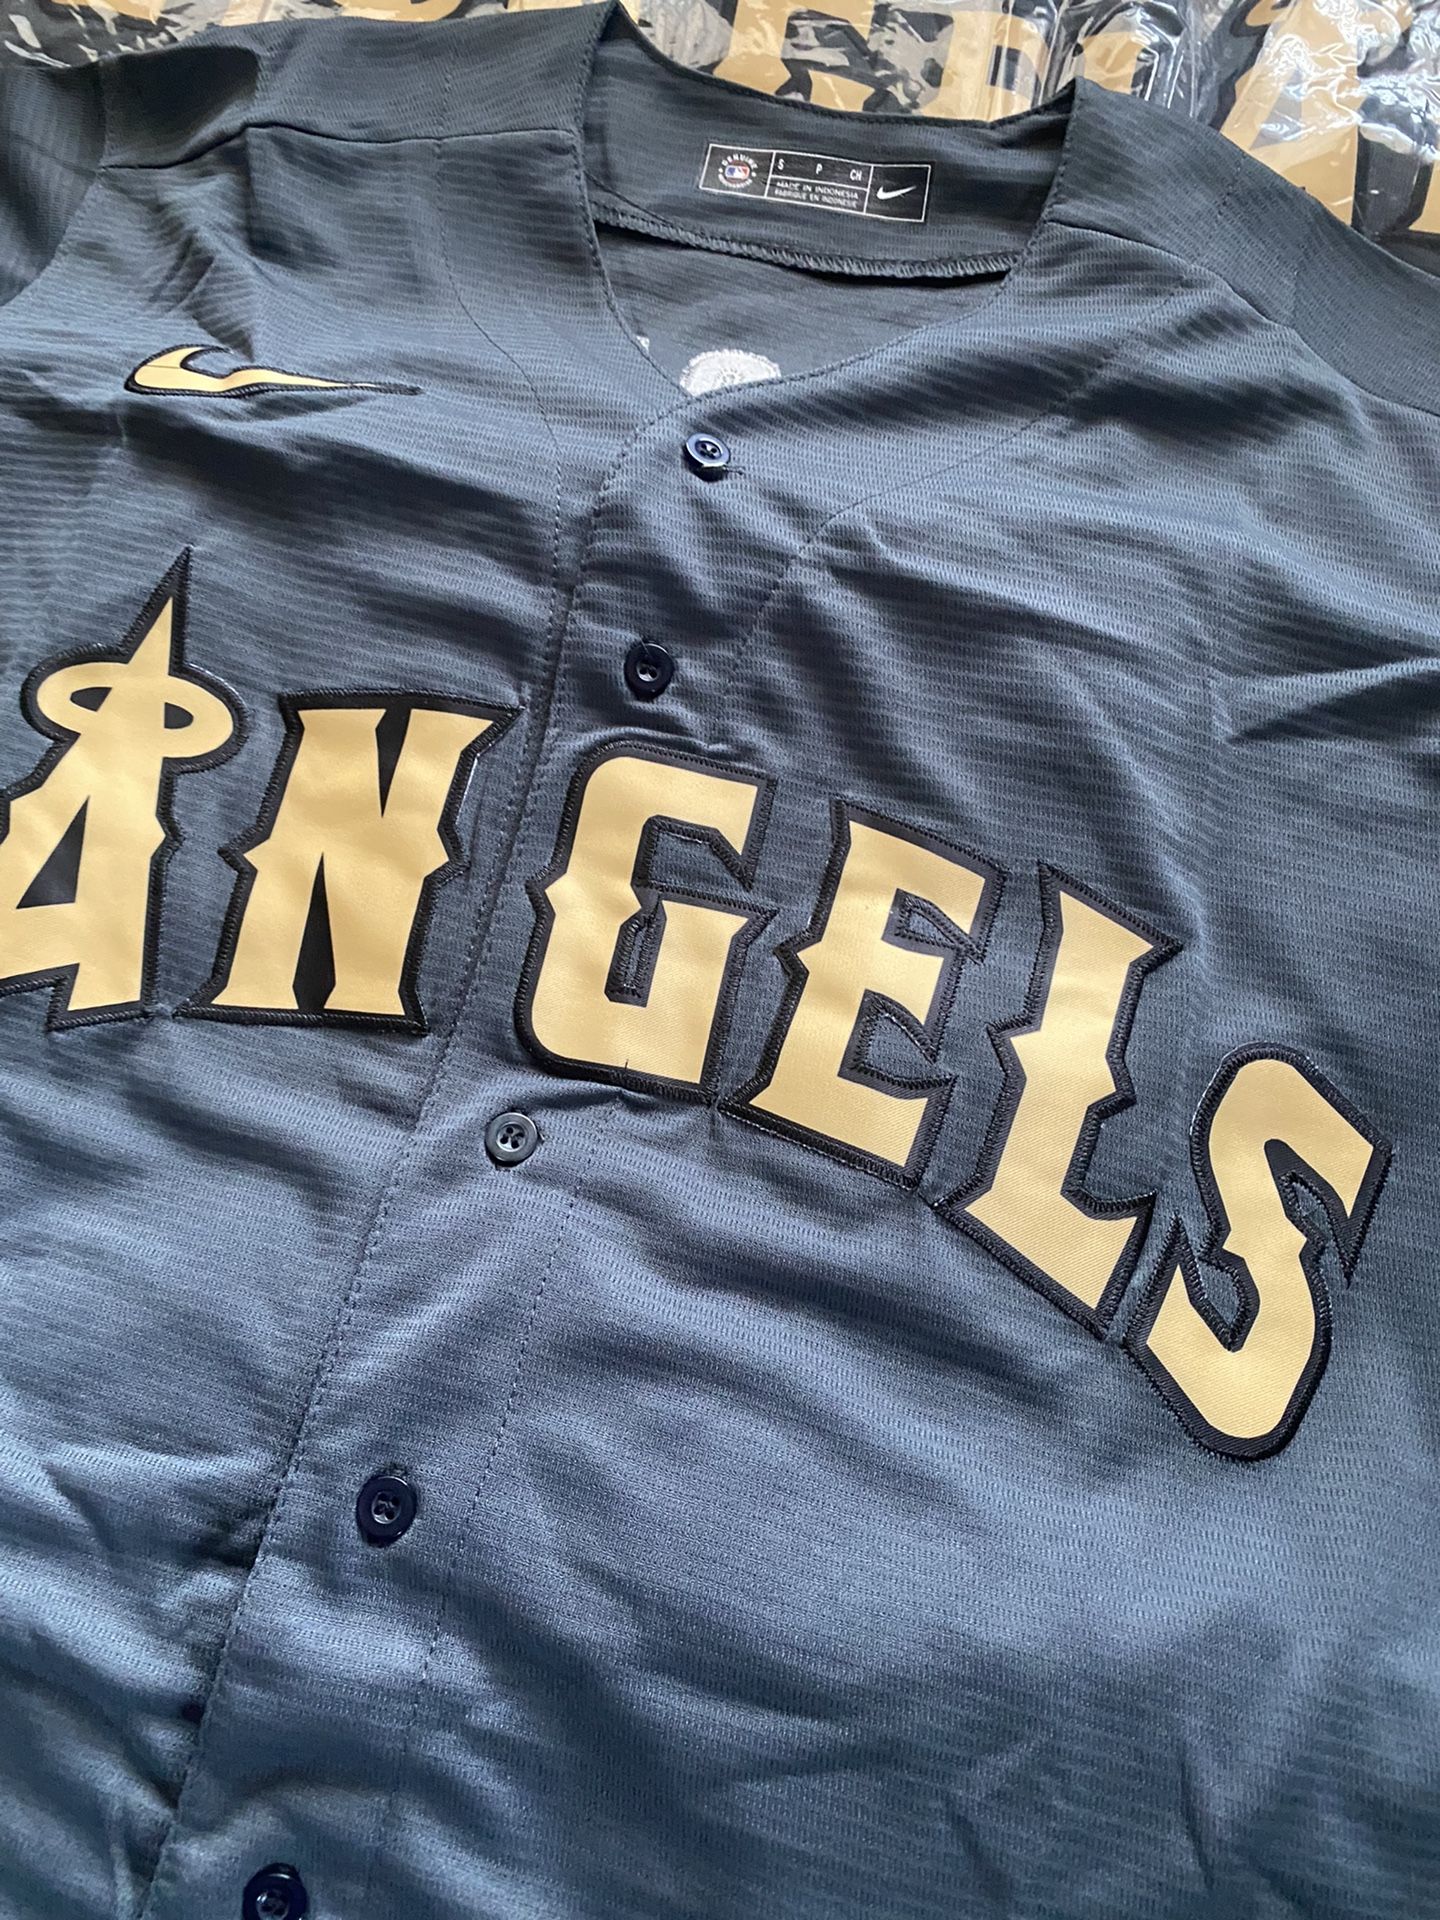 angels all star game jersey